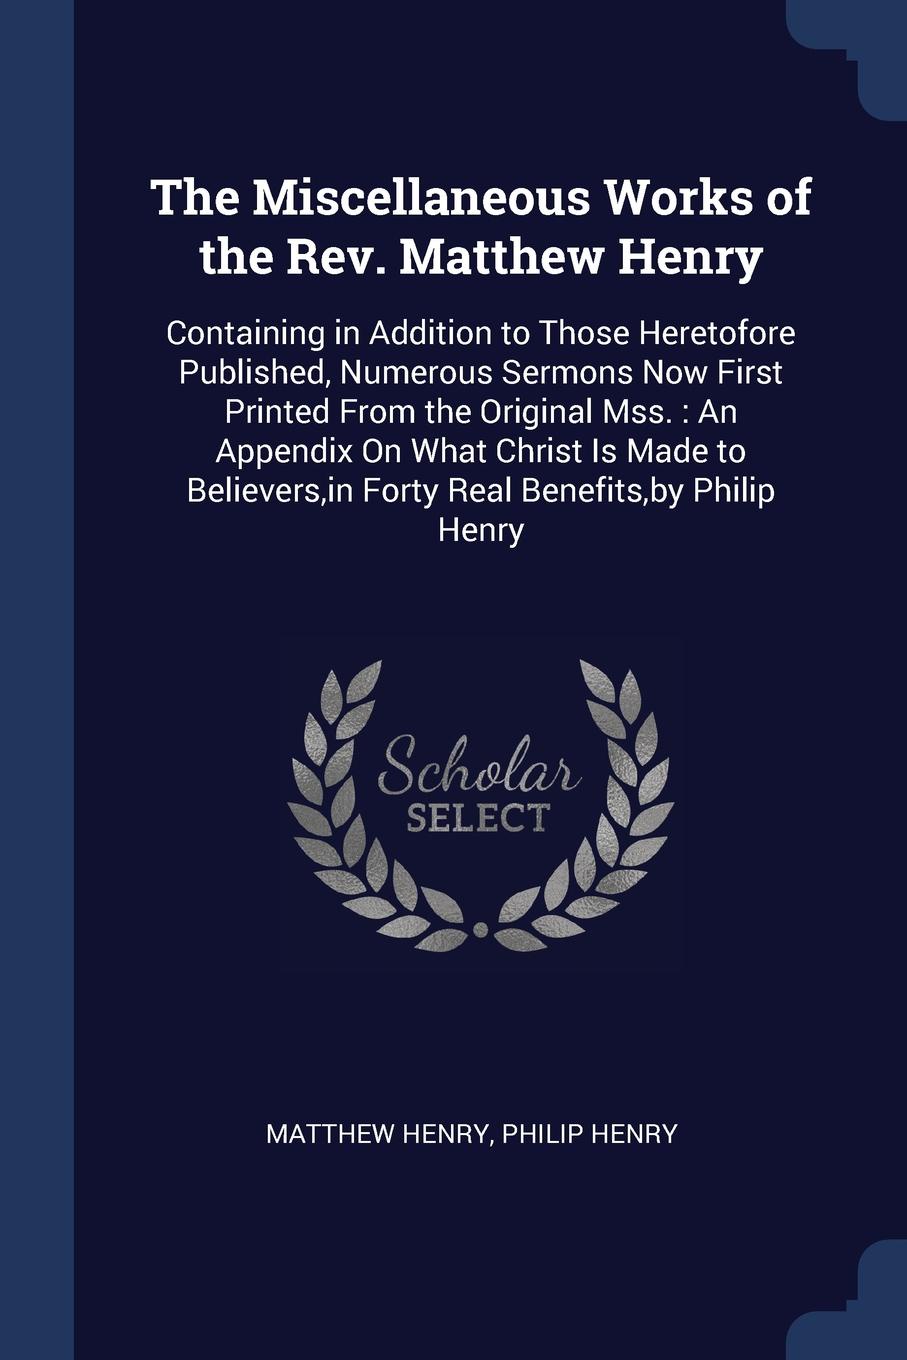 The Miscellaneous Works of the Rev. Matthew Henry. Containing in Addition to Those Heretofore Published, Numerous Sermons Now First Printed From the Original Mss. : An Appendix On What Christ Is Made to Believers,in Forty Real Benefits,by Philip H...